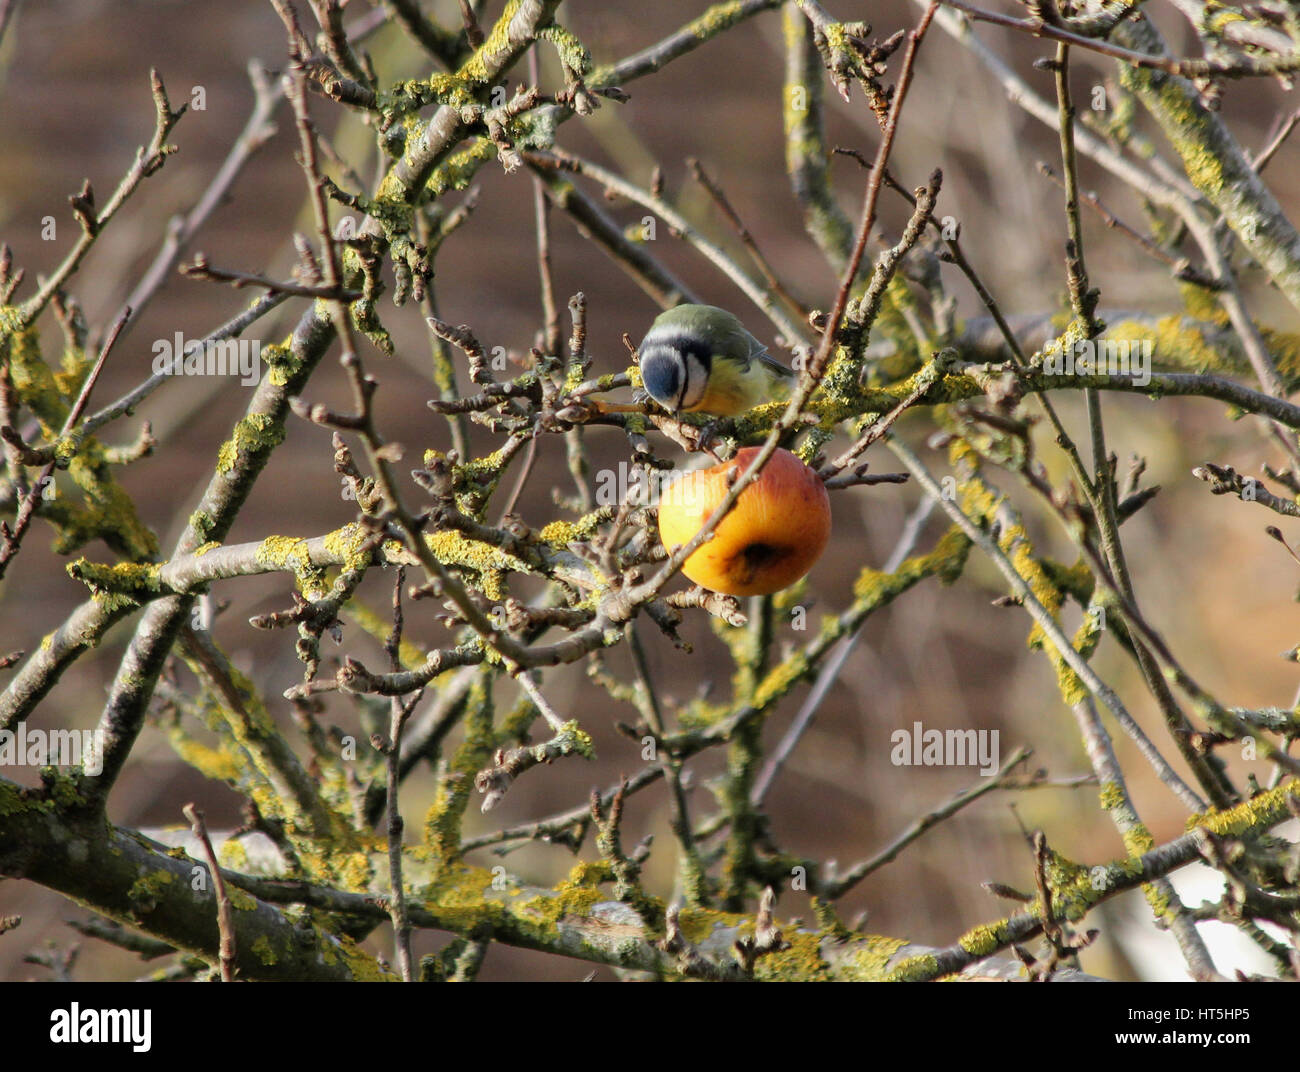 Eurasian blue tit (Cyanistes caeruleus) hunting for insects in a Cox's apple on an apple tree (Malus domestica) with branches covered in yellow lichen Stock Photo